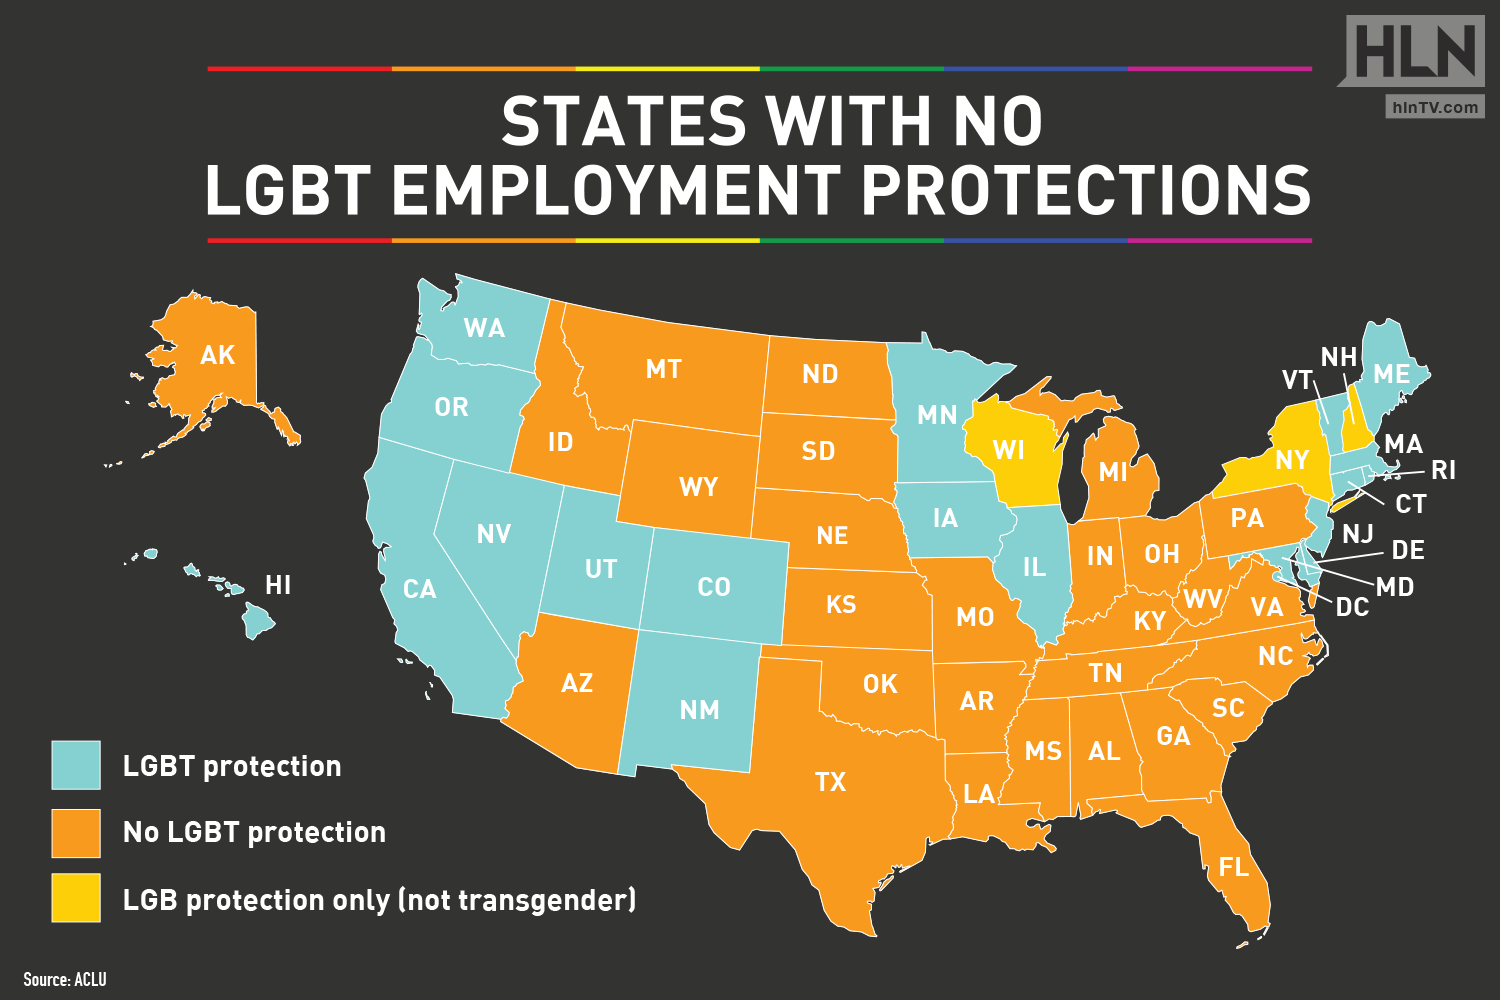 States With No LGBT Employment Protections